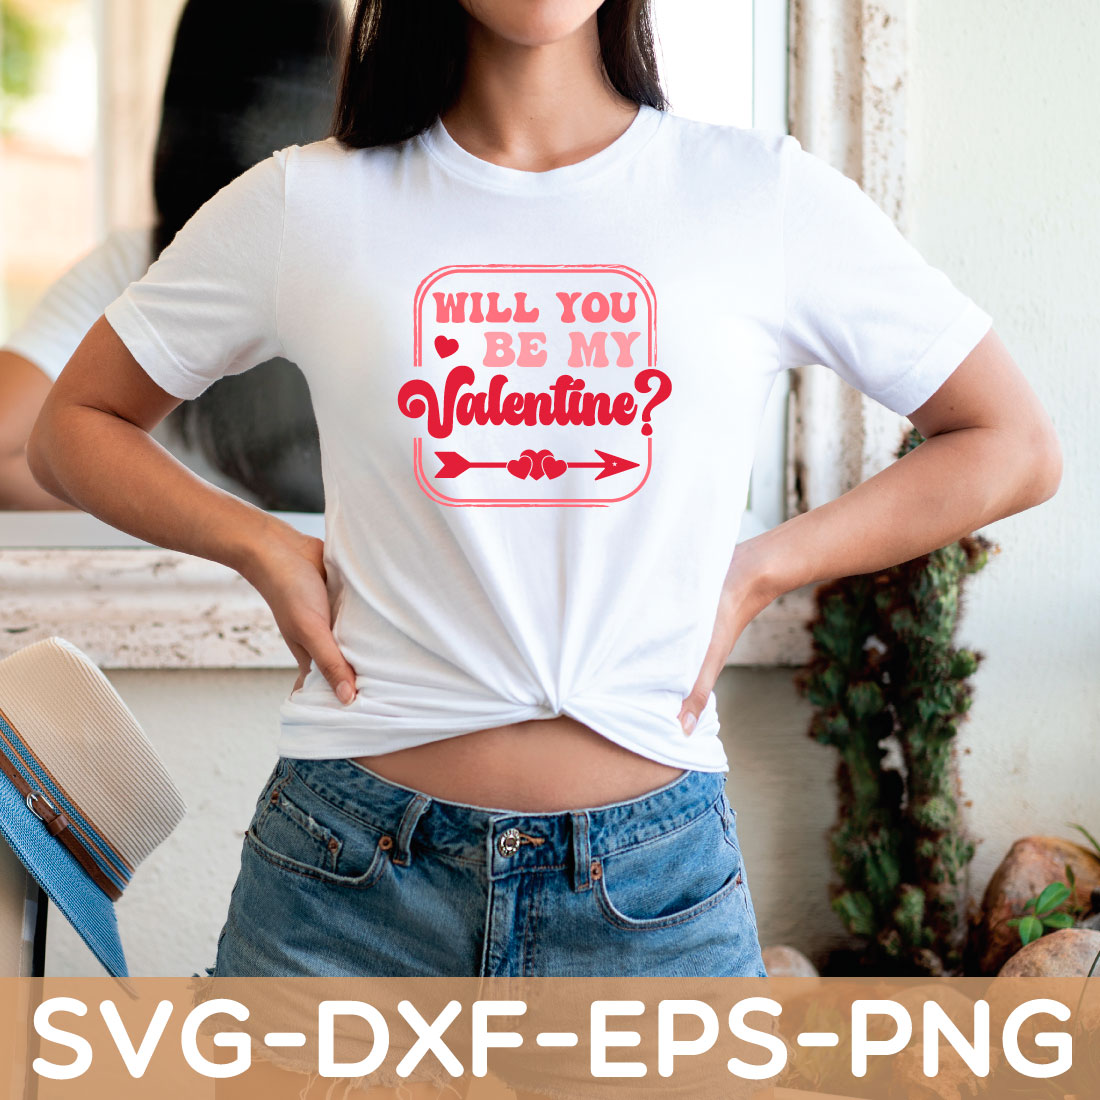 will you be my valentine? retro preview image.